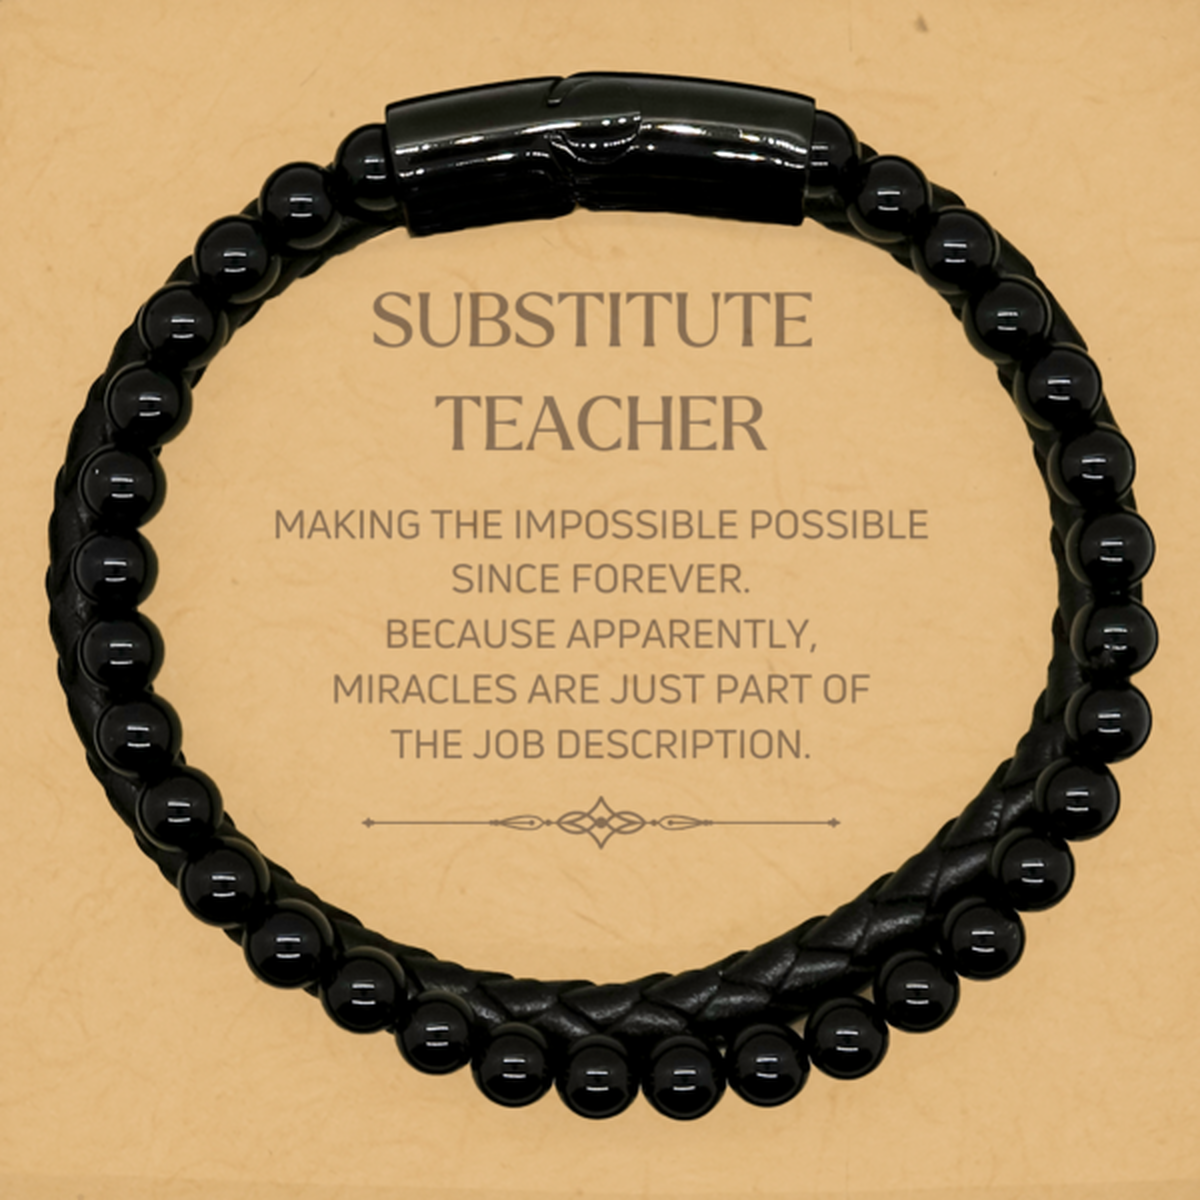 Funny Substitute Teacher Gifts, Miracles are just part of the job description, Inspirational Birthday Stone Leather Bracelets For Substitute Teacher, Men, Women, Coworkers, Friends, Boss